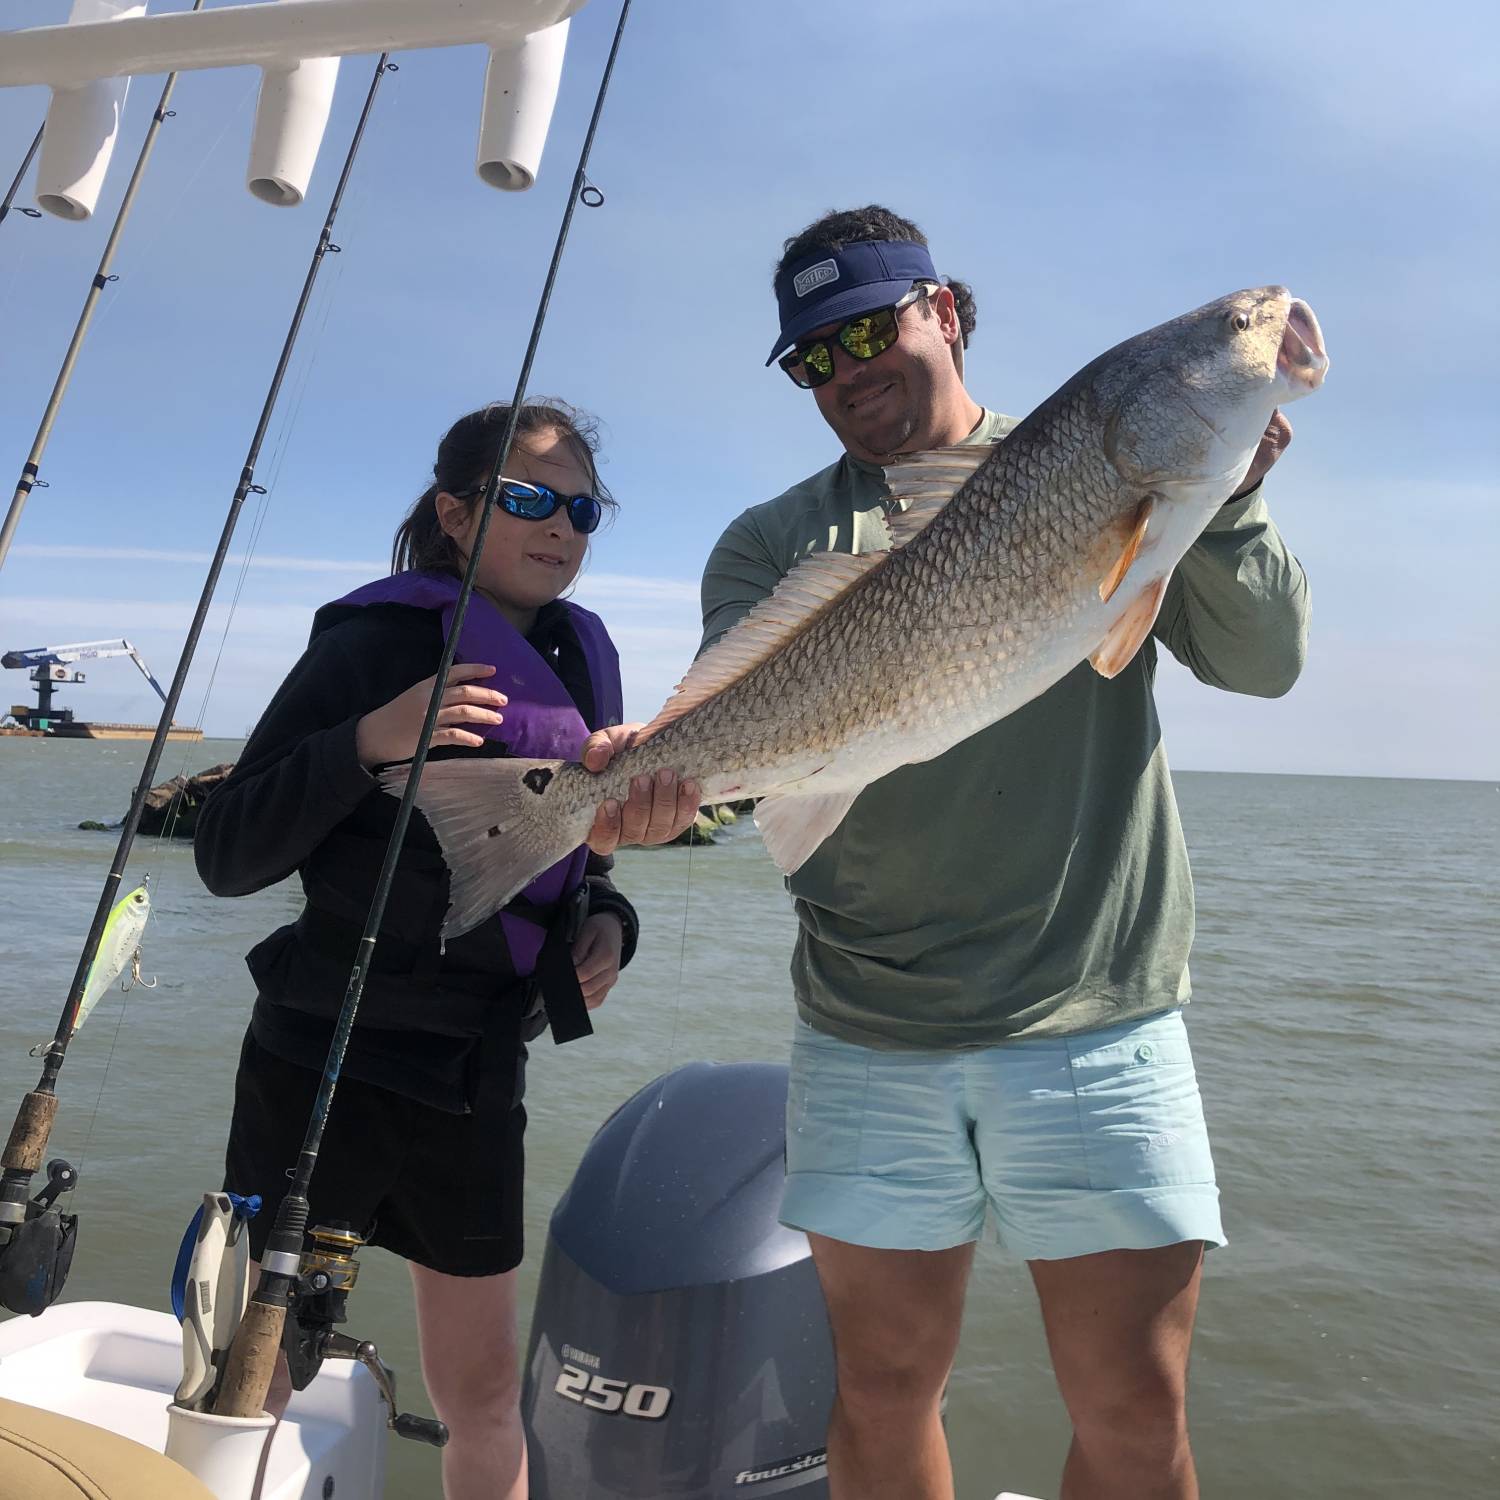 Title: Addie and Dad - On board their Sportsman Masters 227 Bay Boat - Location: Cameron Jetties. Participating in the Photo Contest #SportsmanApril